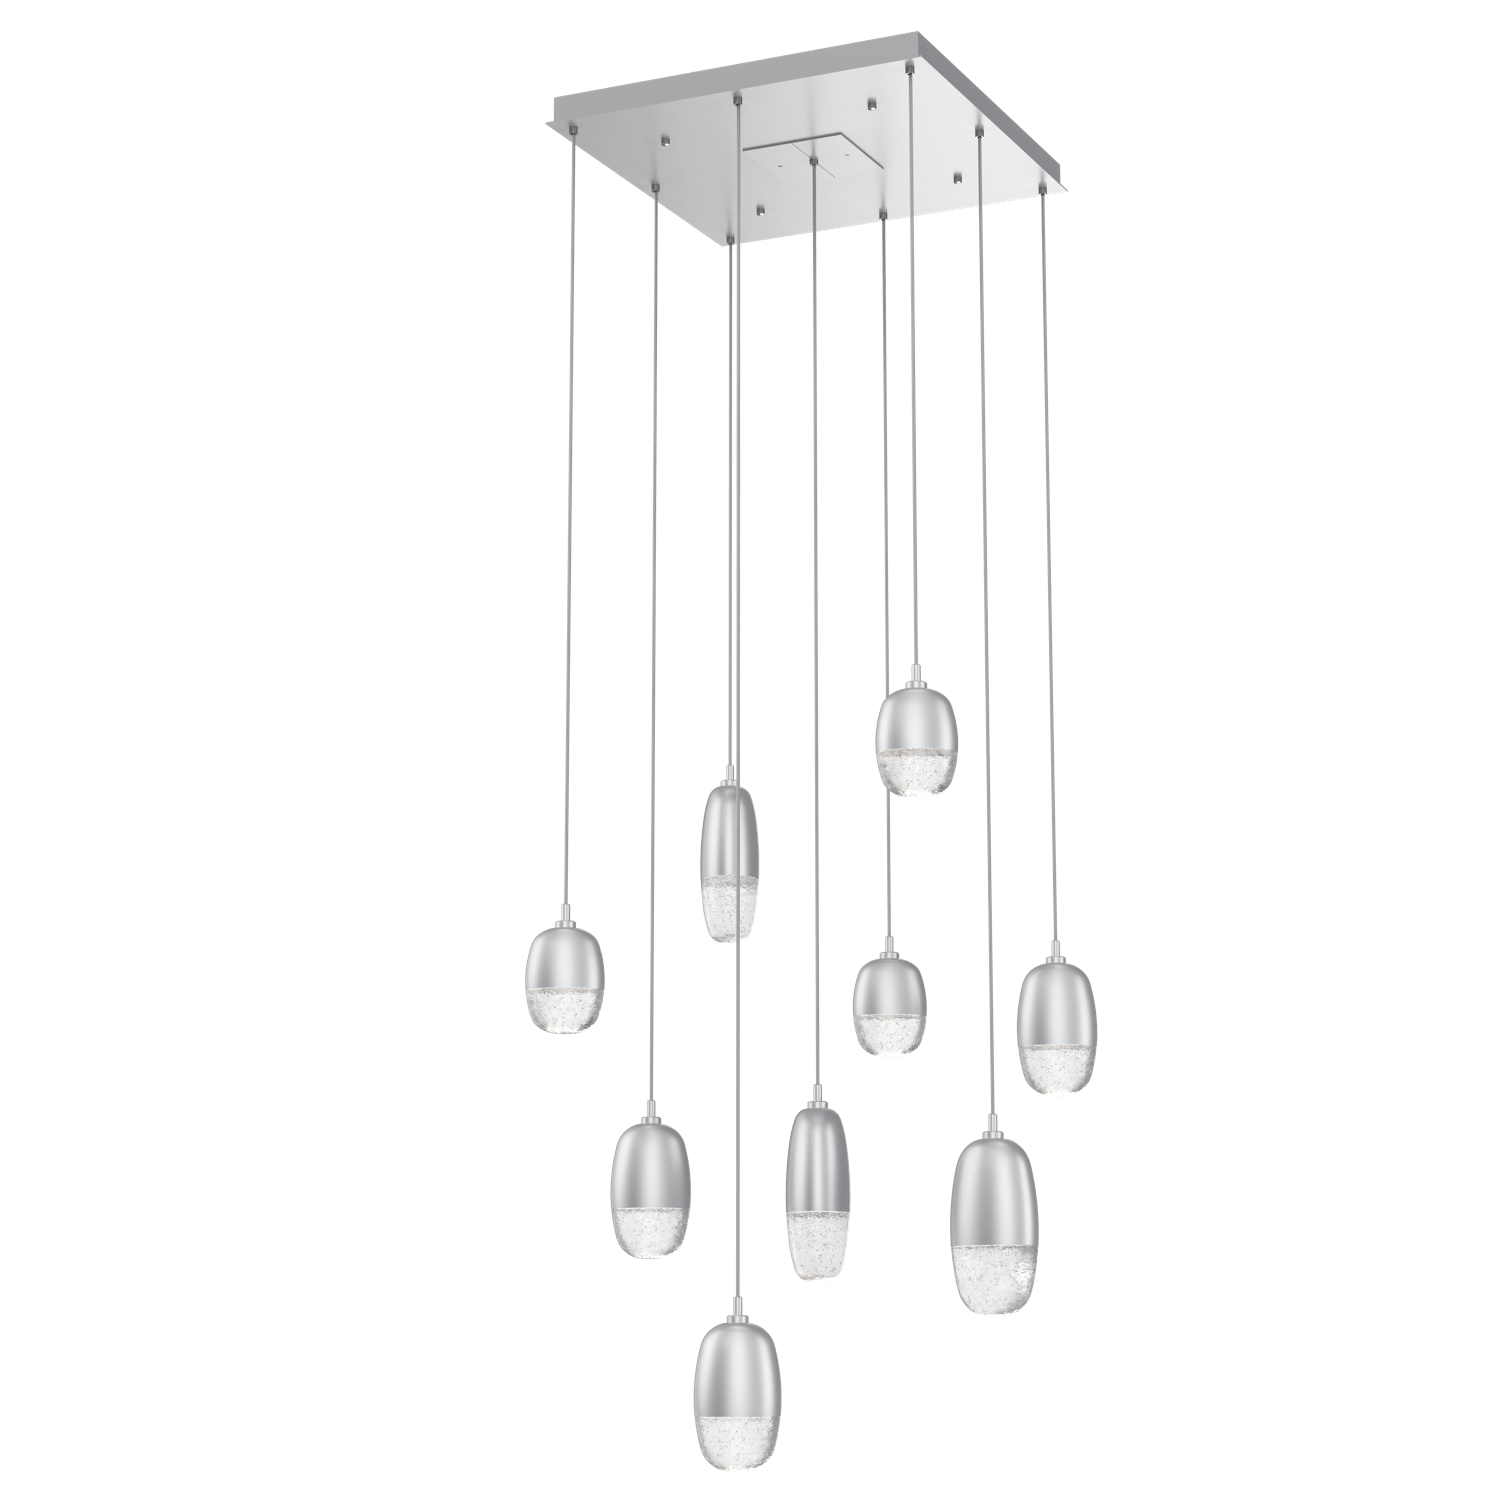 CHB0079-09-CS-Hammerton-Studio-Pebble-9-light-square-pendant-chandelier-with-classic-silver-finish-and-clear-cast-glass-shades-and-LED-lamping